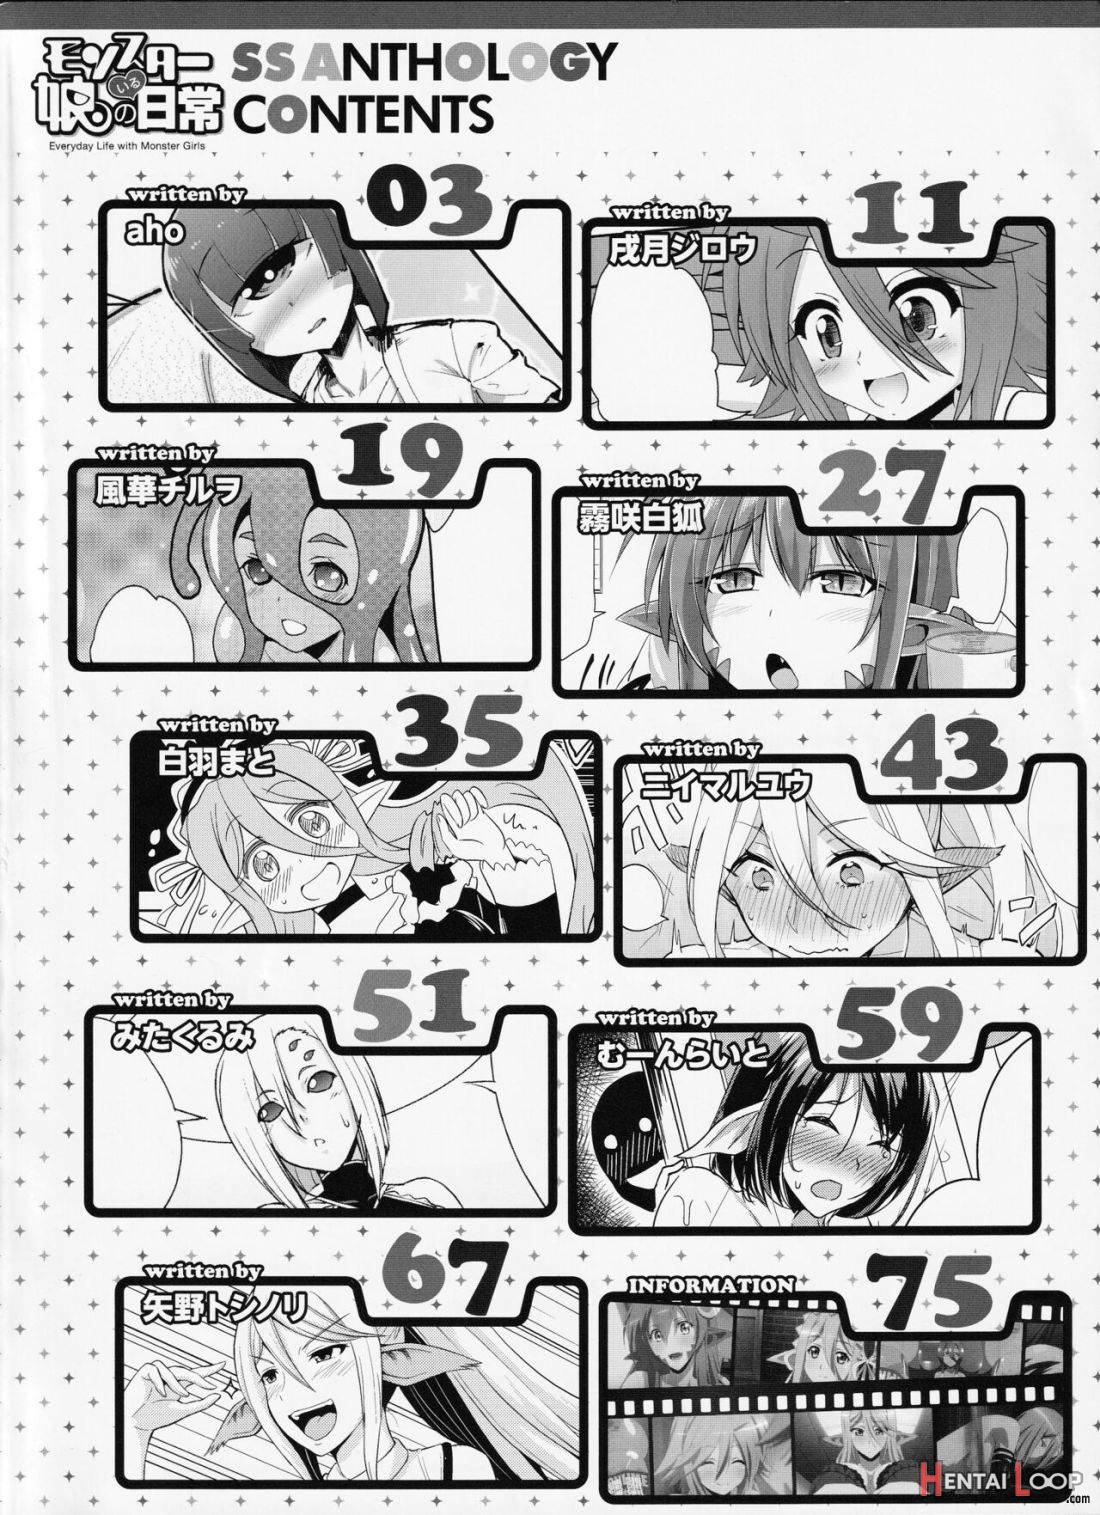 Monster Musume No Iru Nichijou Ss Anthology – Everyday Life With Monster Girls page 2